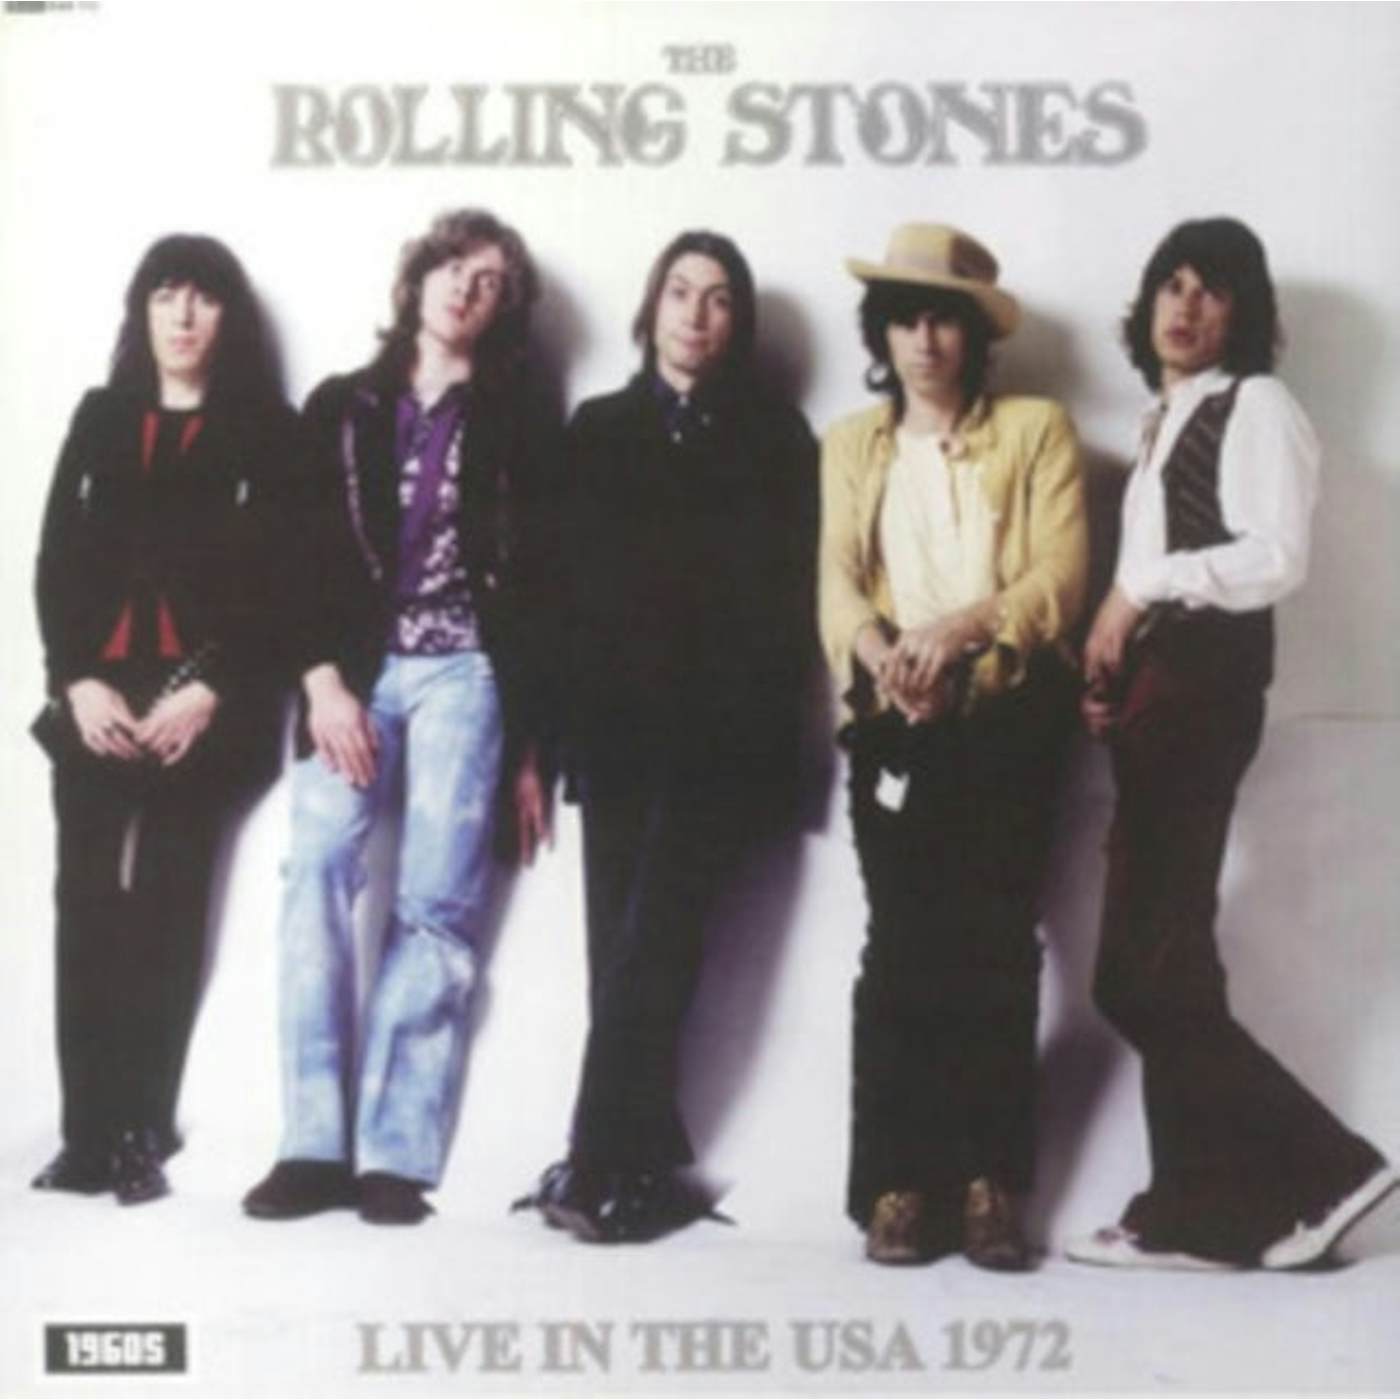 The Rolling Stones LP - Live In The USA 1972 (Vinyl)